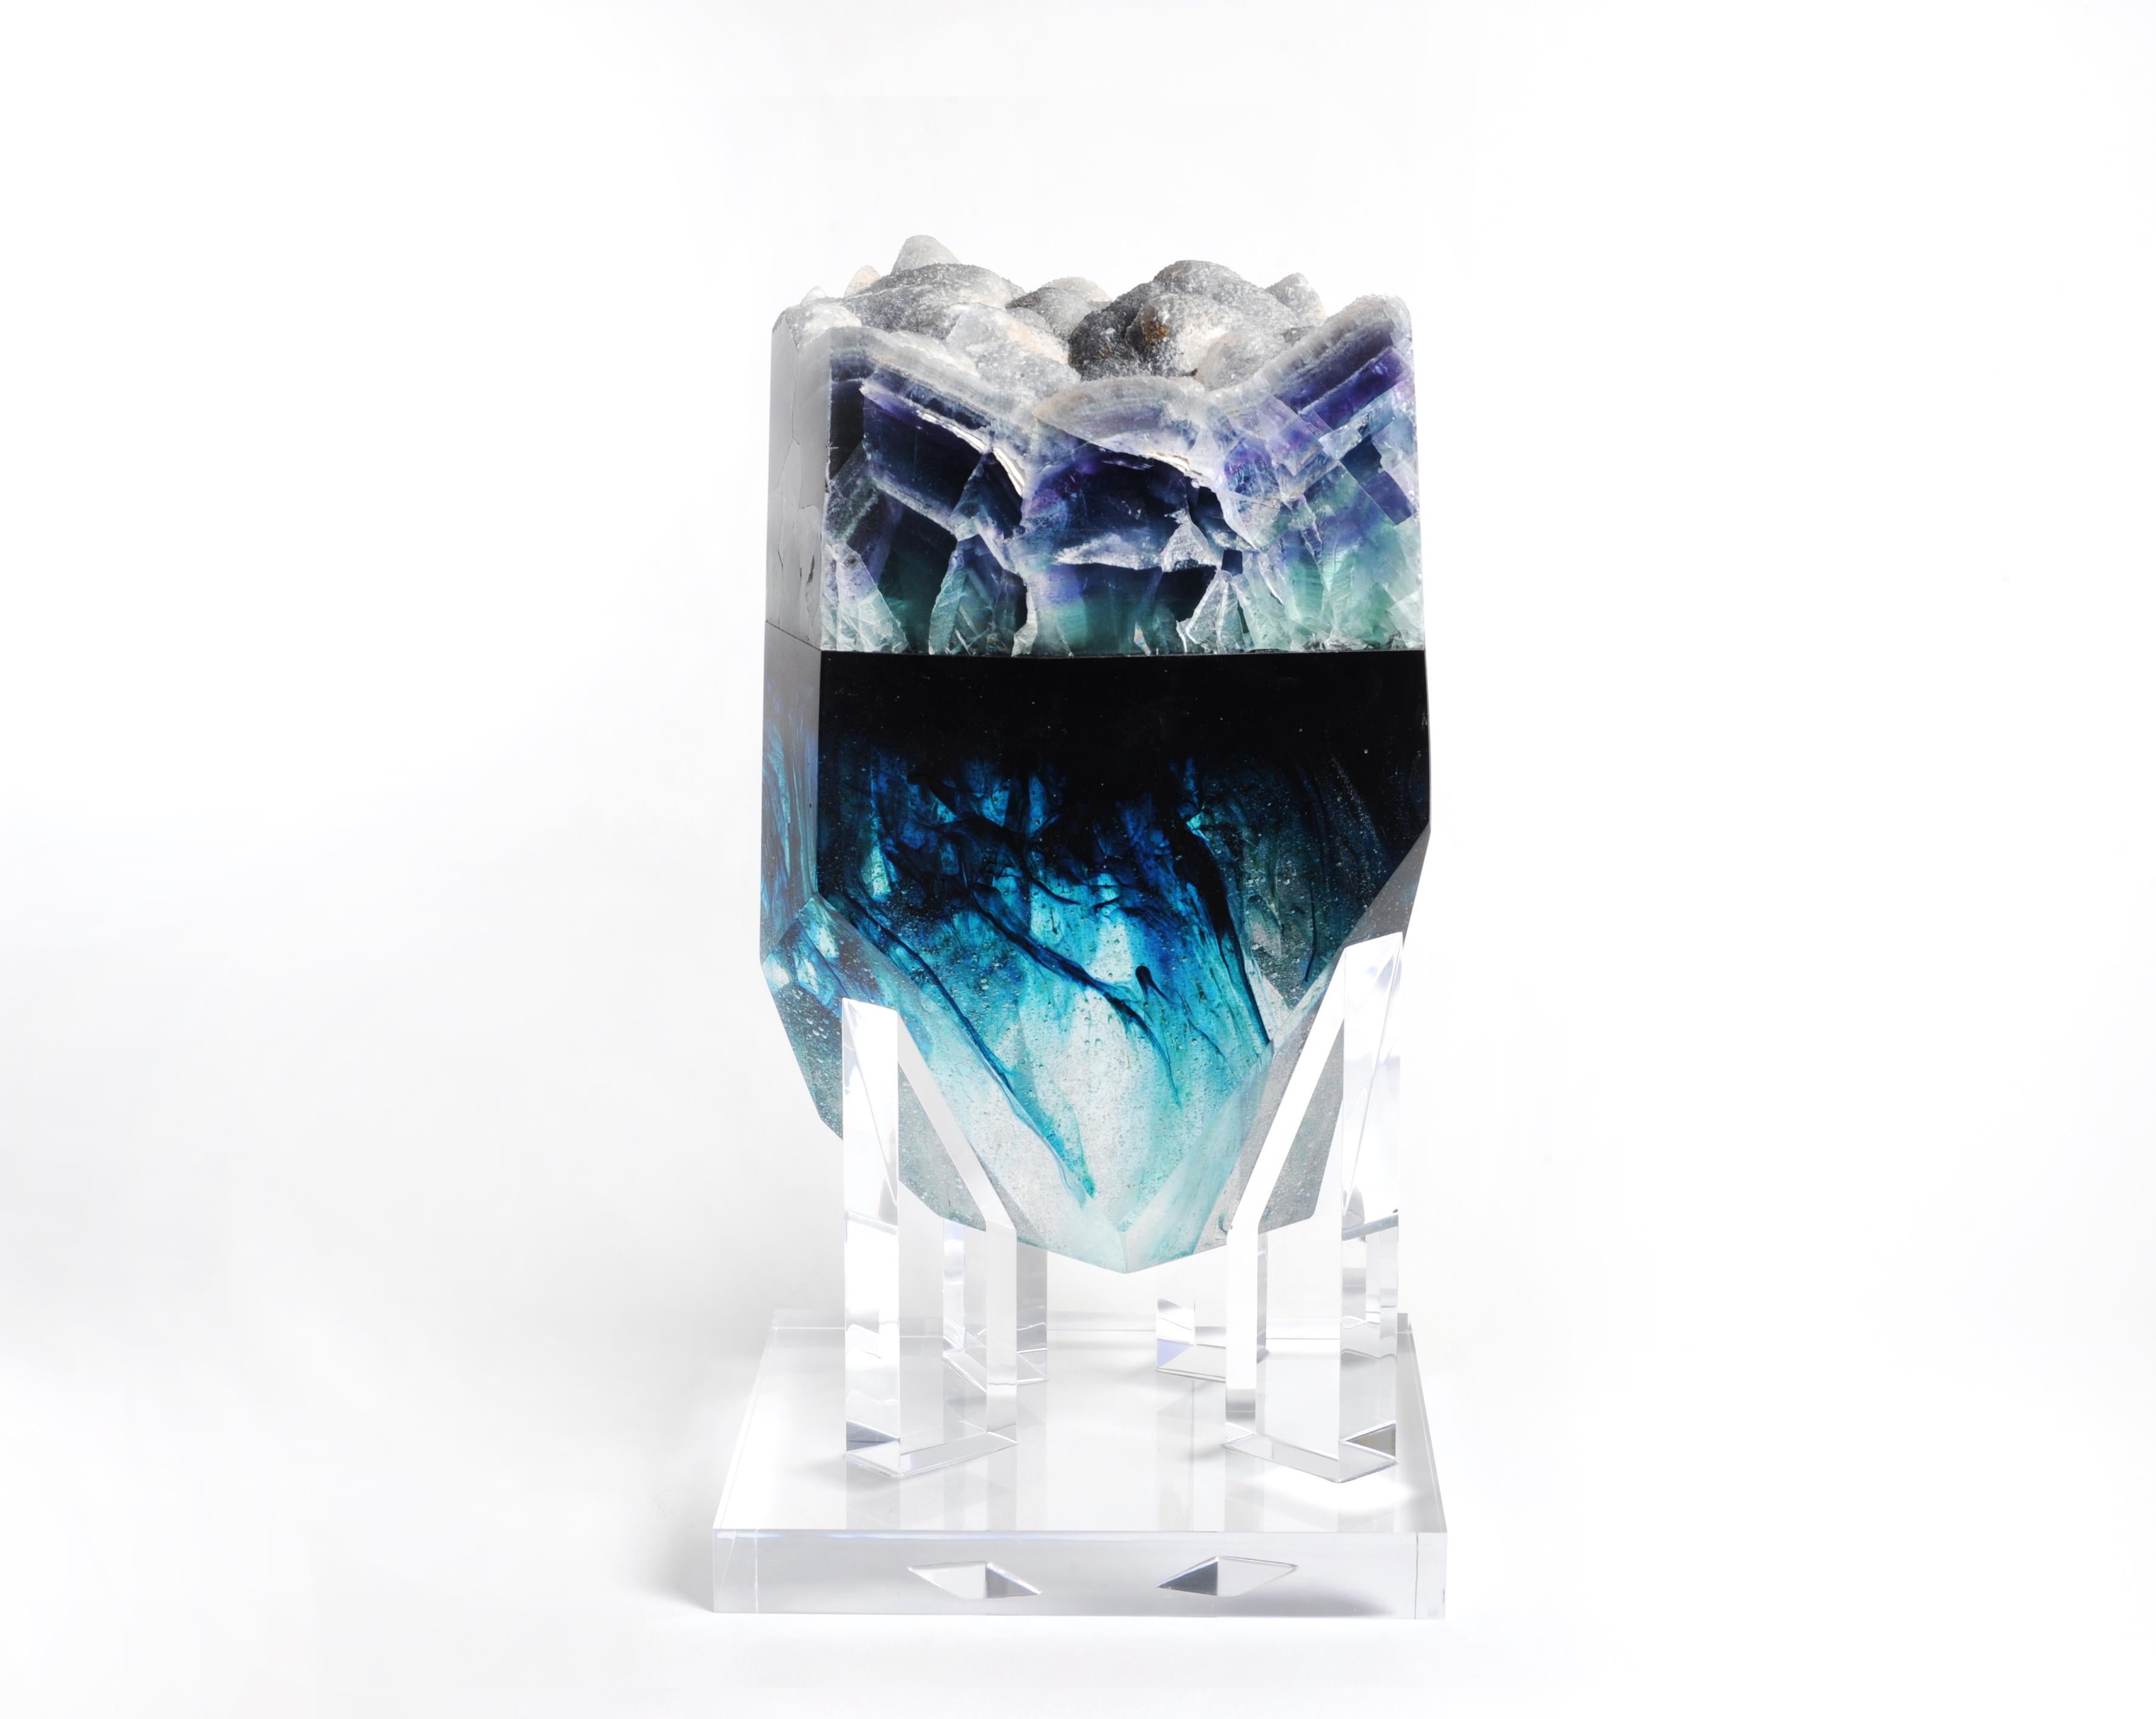 Krown Jewel
The movement of the ocean, the turquoise and deep blue hues contained in a magnificent irregular prism of glass only deserve to be crowned by one of the most mysterious minerals in the world, the fluorite. This natural specimen from San